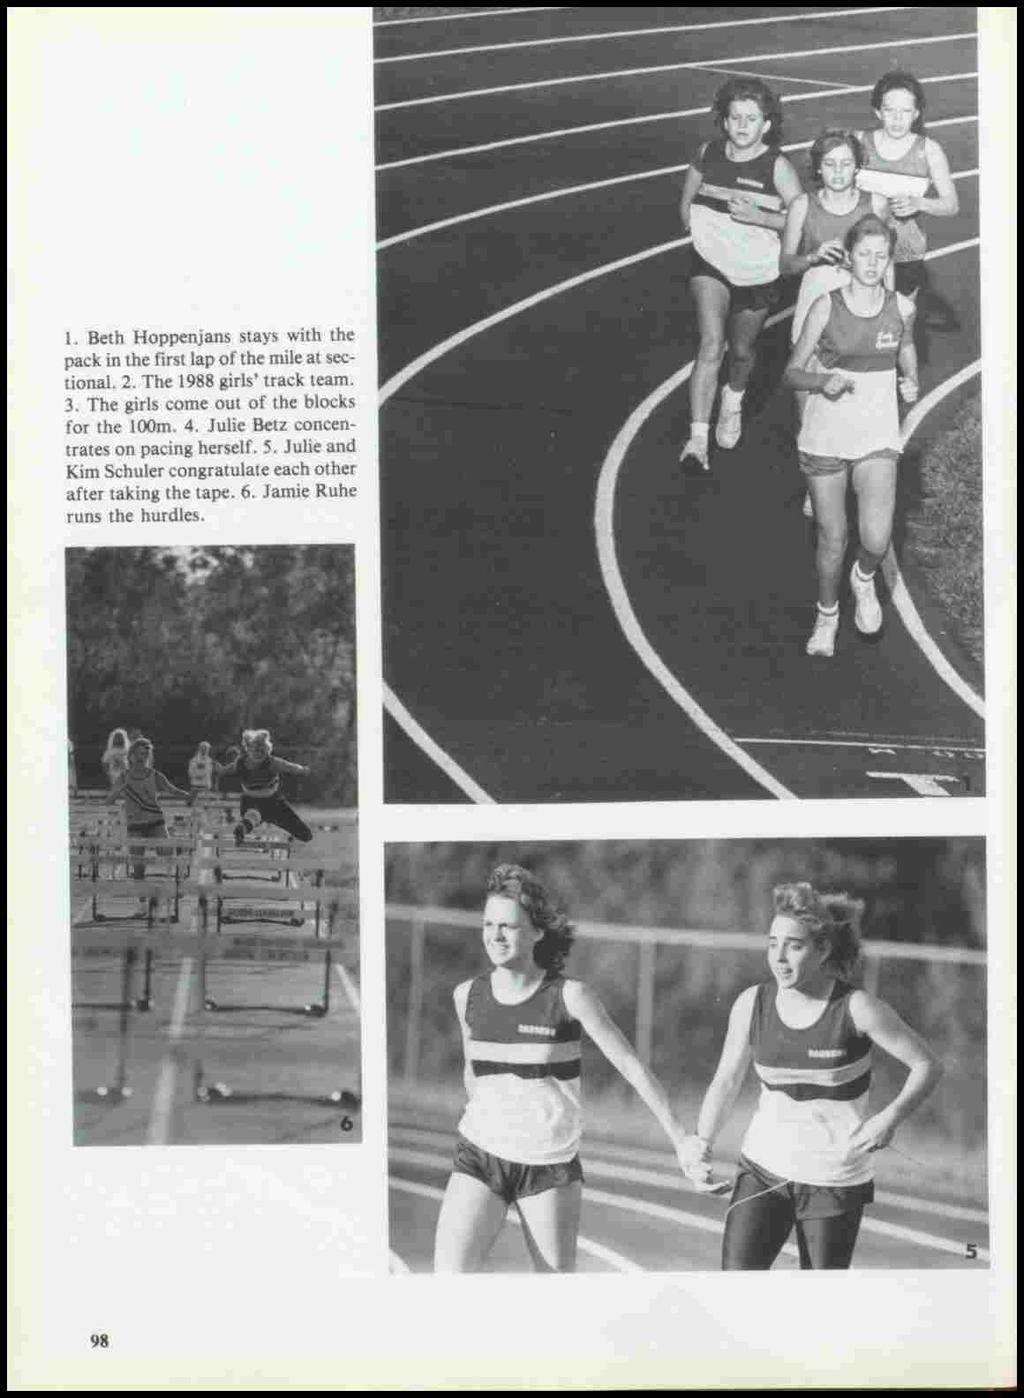 1. Beth Hoppenjans stays with the pack in the first lap of the mile at sectional. 2. The 1988 girls' track team. 3.